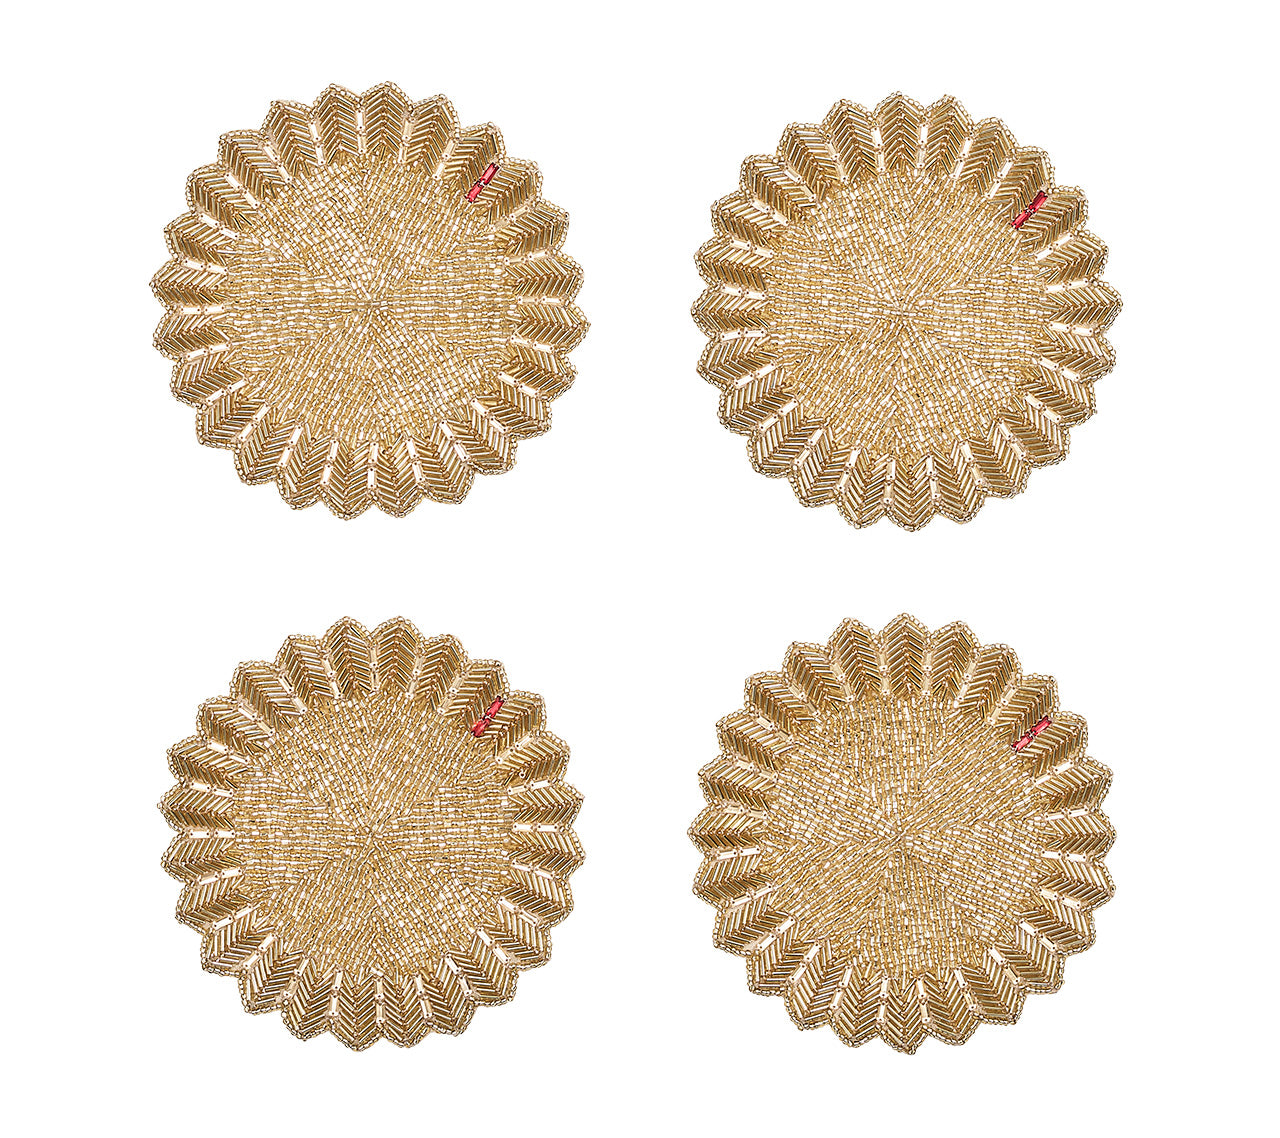 Etoile Coaster in Champagne, Set of 4 in a Gift Box